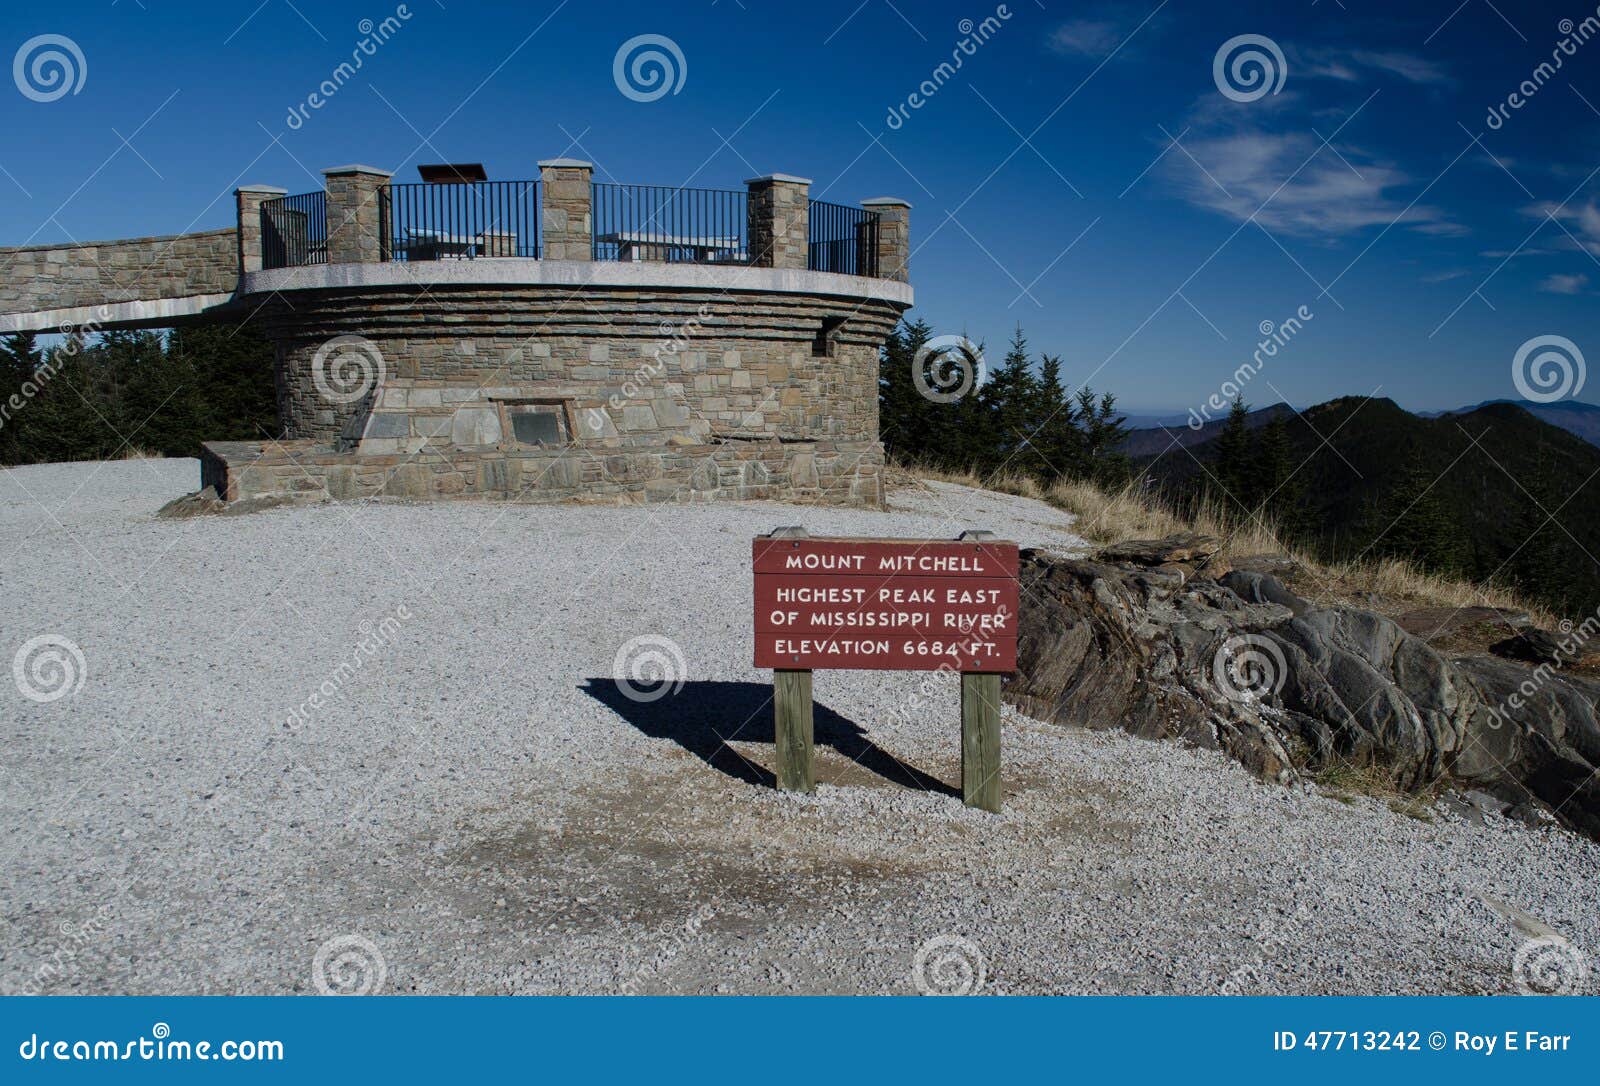 mount mitchell observation tower